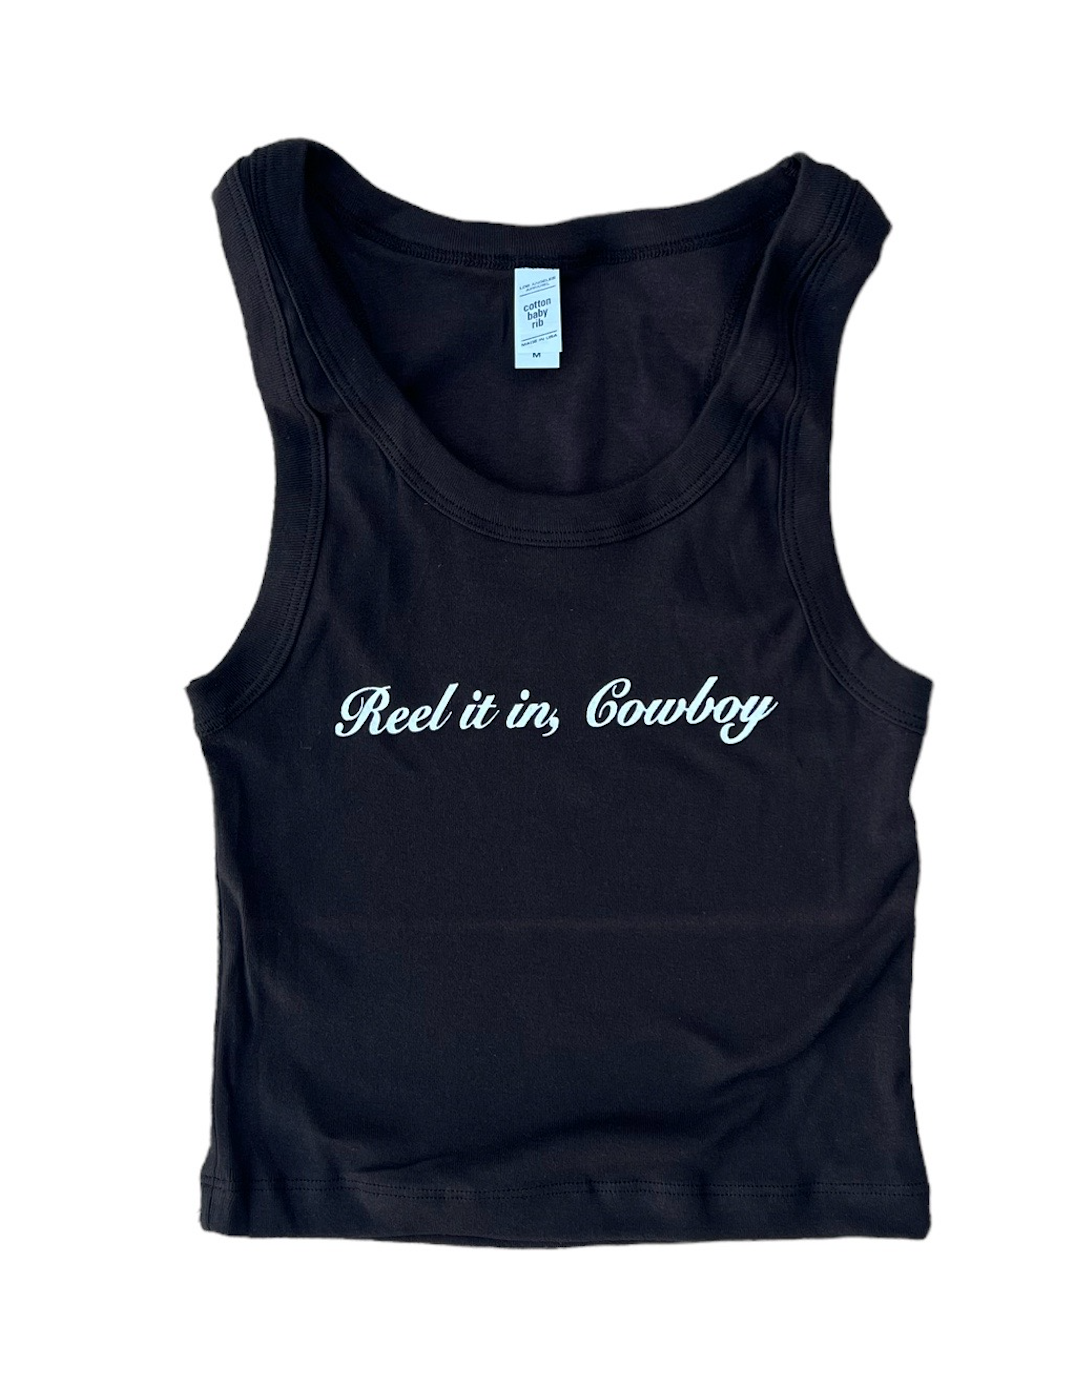 LIMITED EDITION "Reel it in, Cowboy" Cropped Tank Top